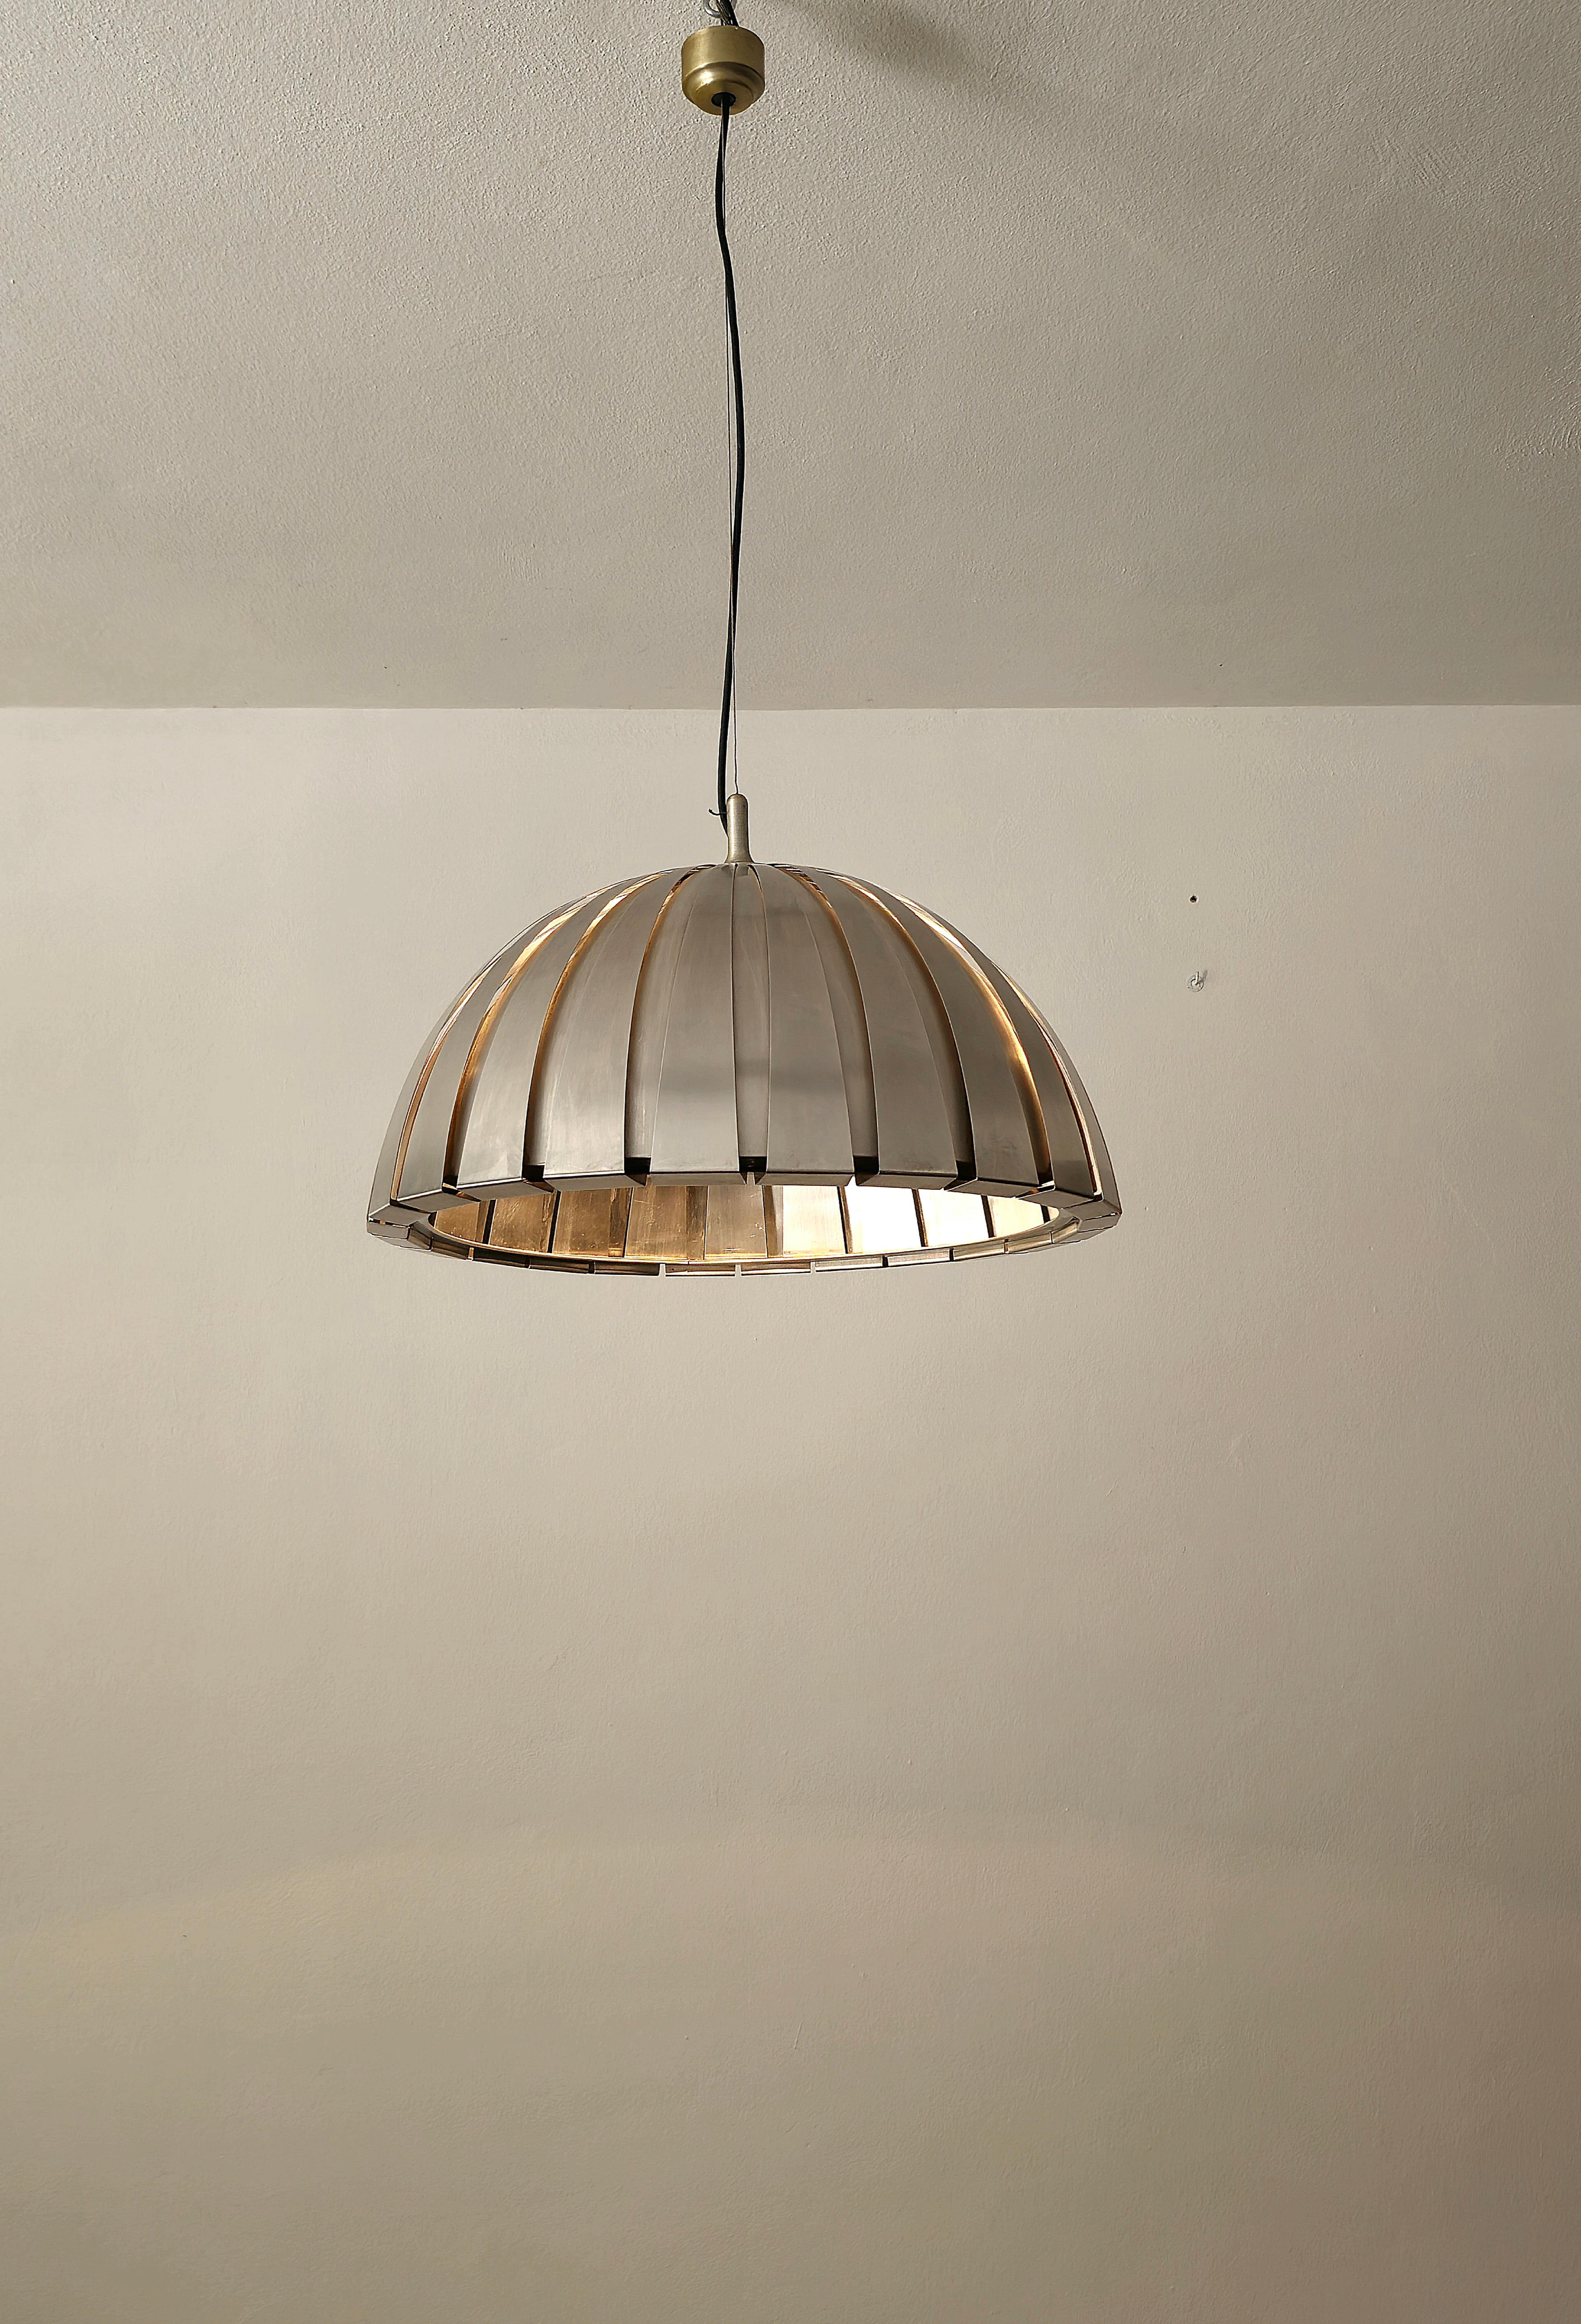 Suspension lamp designed in Italy in the 60s by Elio Martinelli.
The pendant lamp was made of brushed steel with bent and curved bars.


Note: We try to offer our customers an excellent service even in shipments all over the world, collaborating